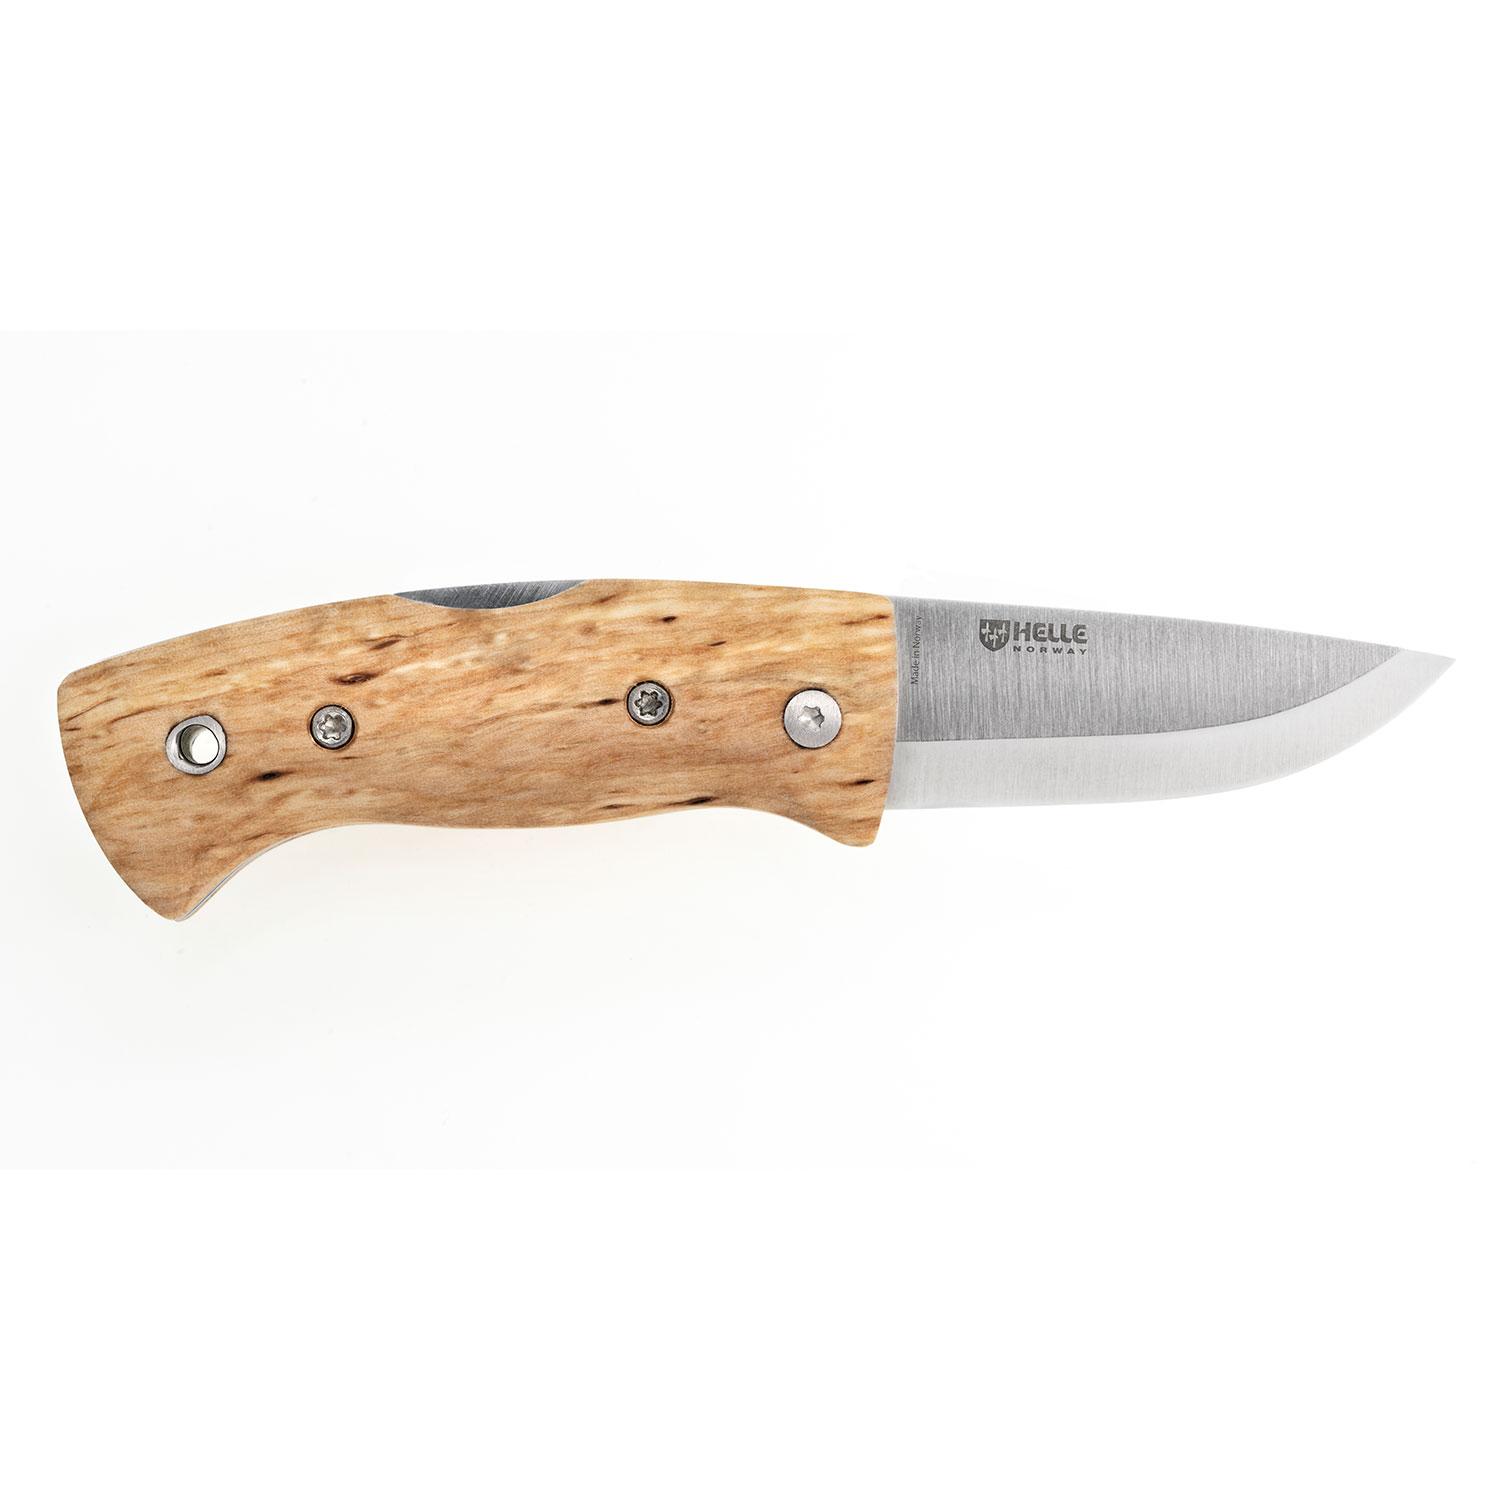 Kletten By Helle Knives | Boundary Waters Catalog